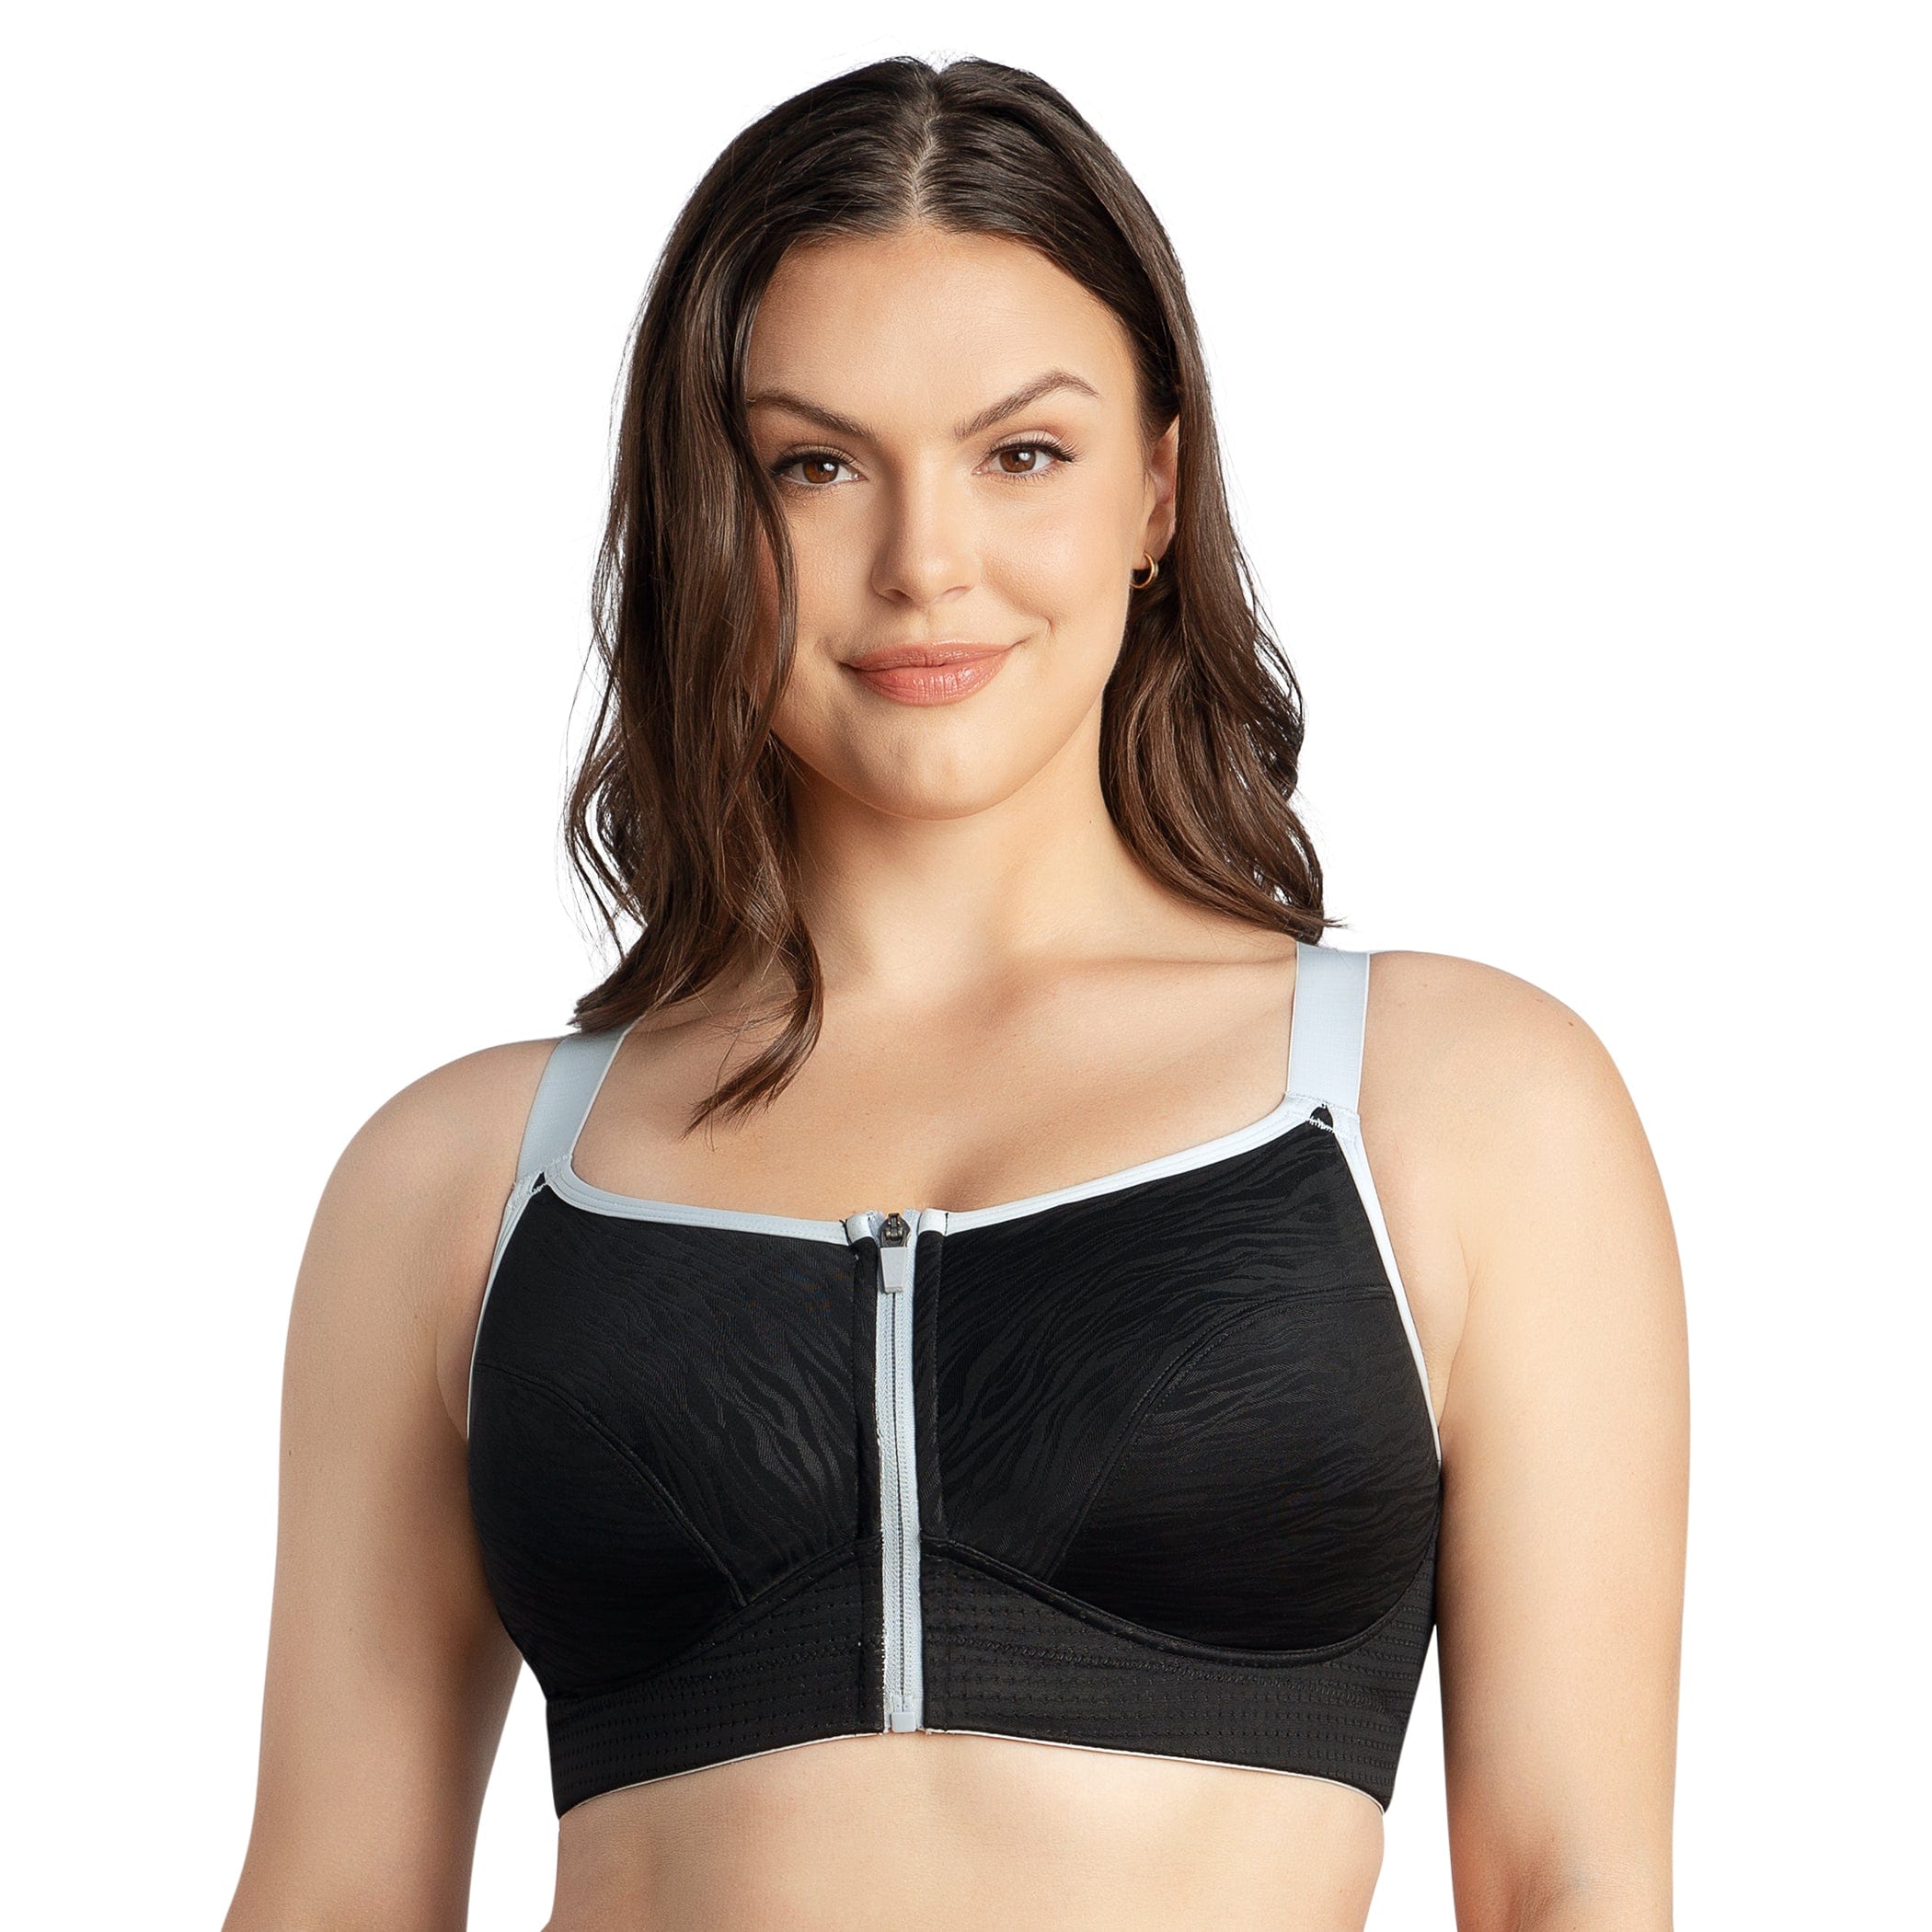 Unlined vs Lined: What's The Difference Between Unlined and Lined Bras? -  ParfaitLingerie.com - Blog